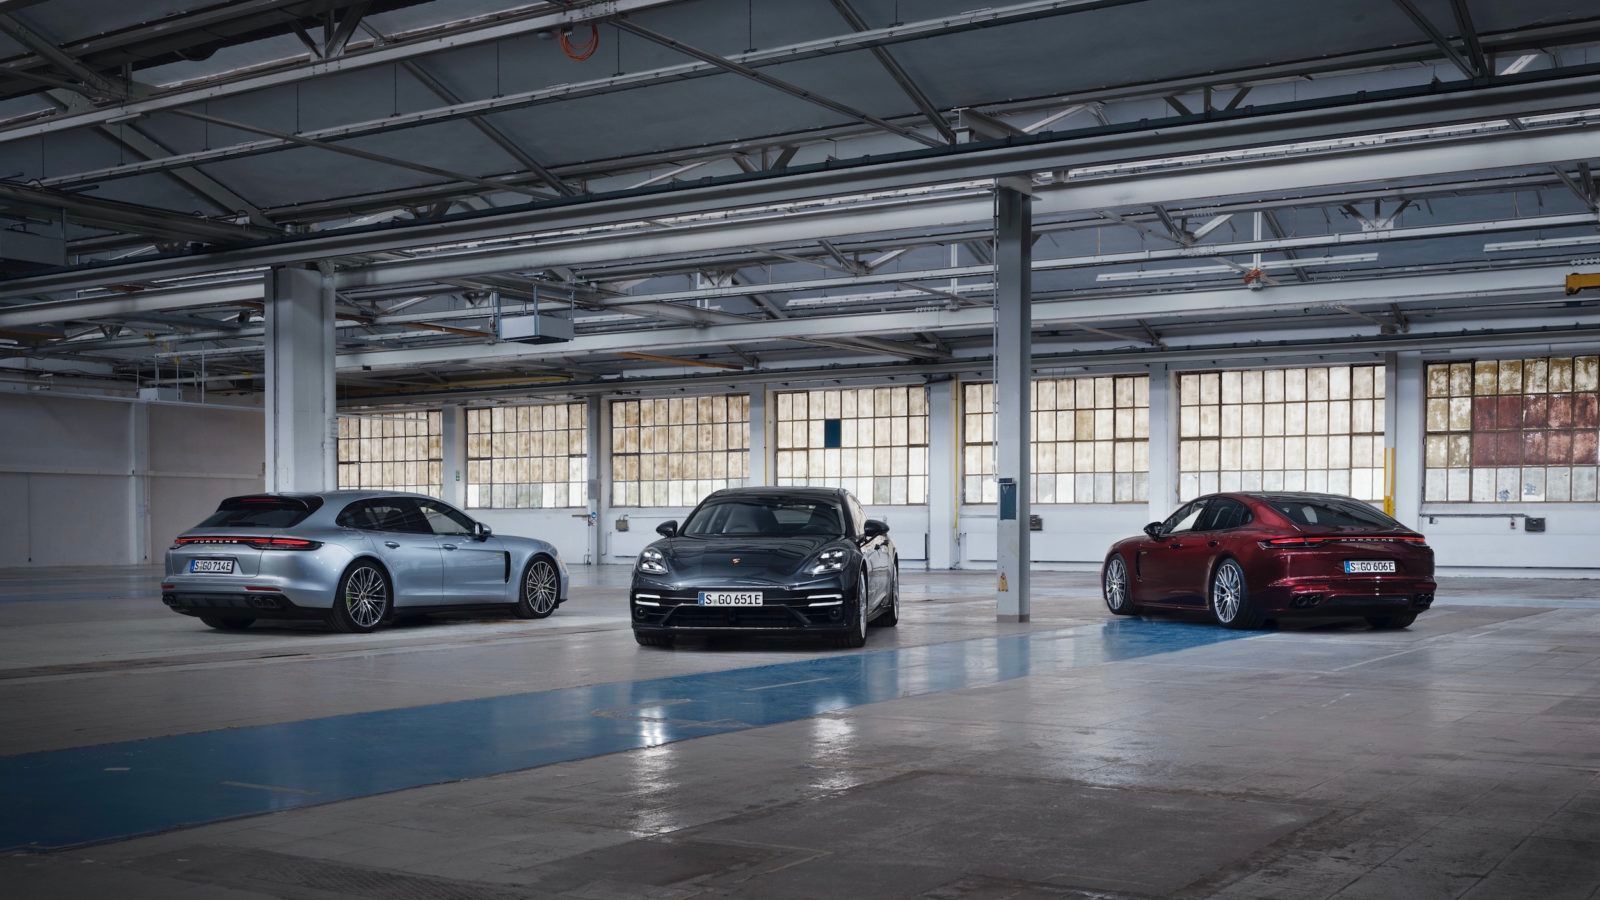 The new Porsche Panamera is its most powerful variation yet